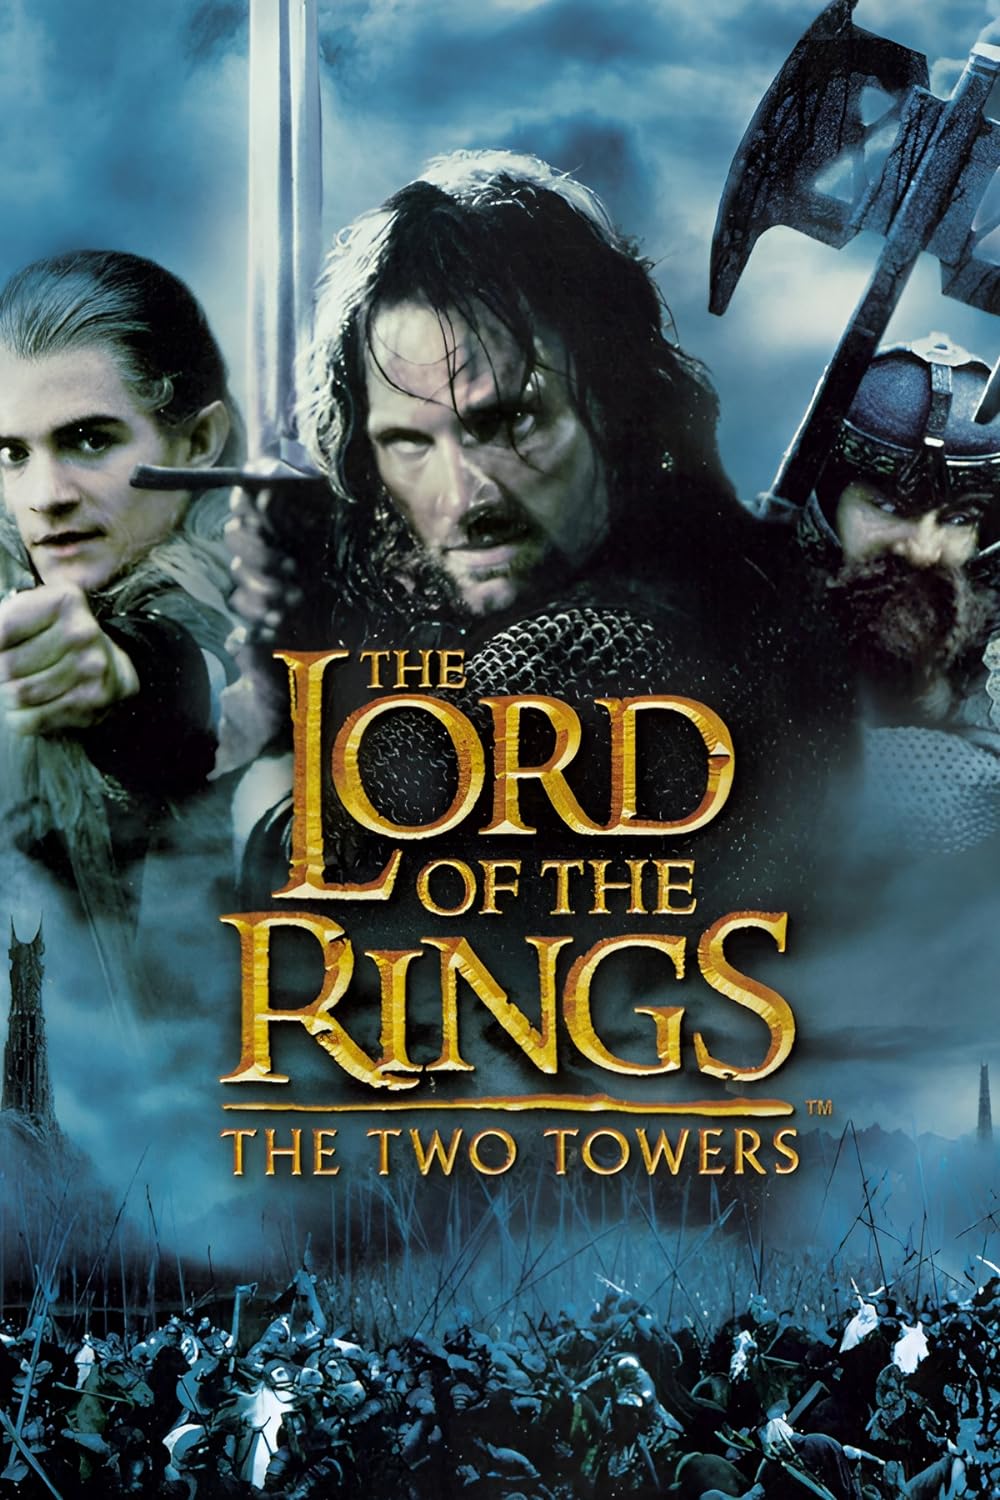 The Lord of the Rings- The Two Towers Extended 2002 3D Conversion 1080p MVC Atmos 7 1 Multi Subs doogle REPOST